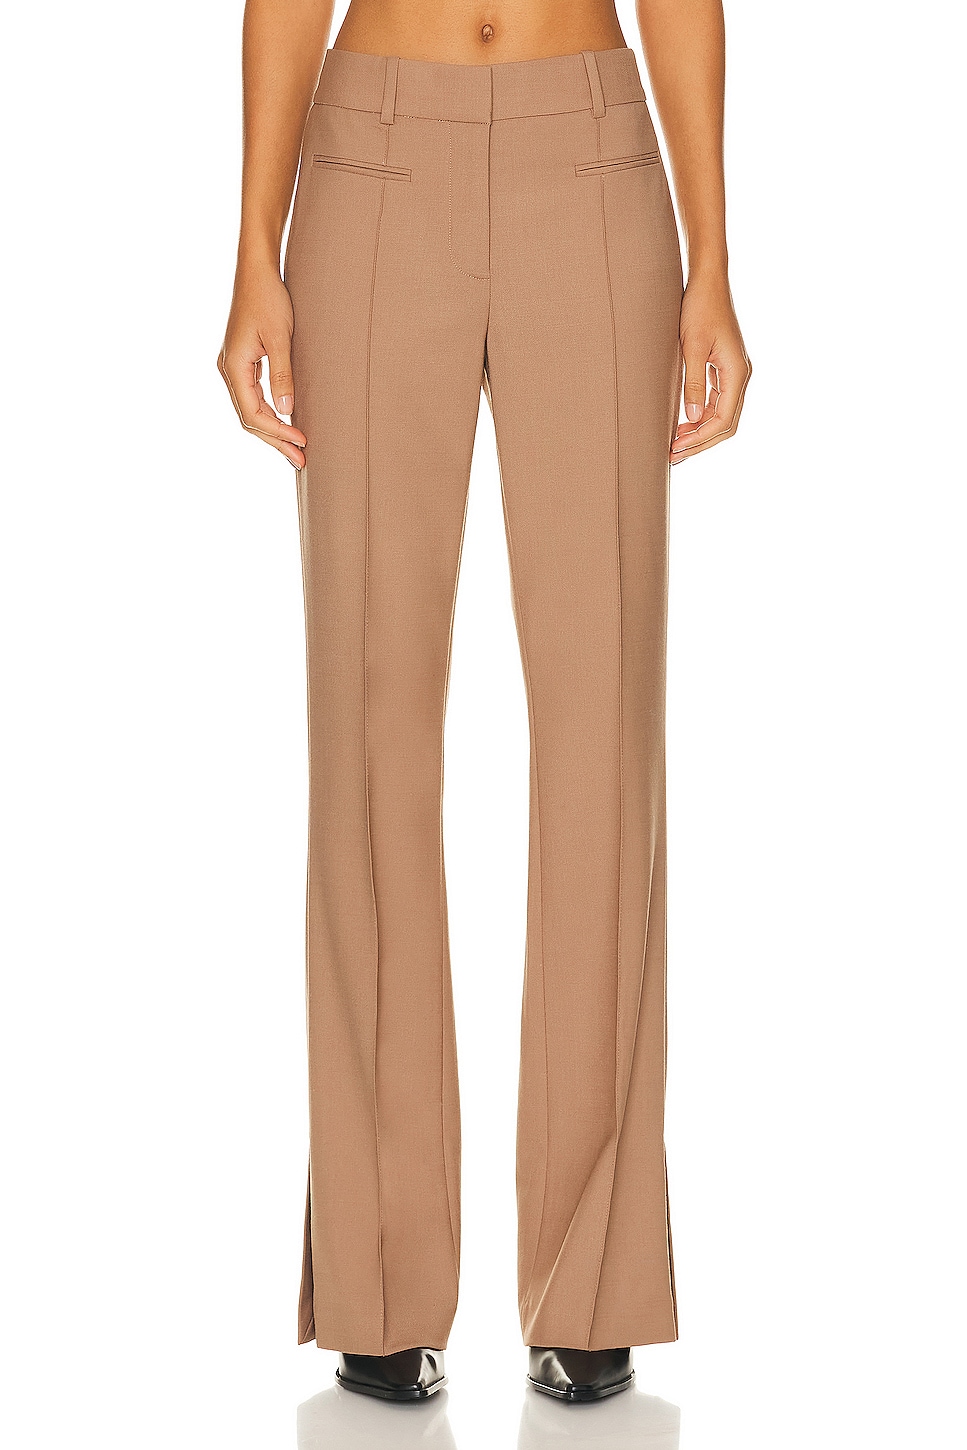 Image 1 of Helmut Lang Vent Bootcut Pant in Dune